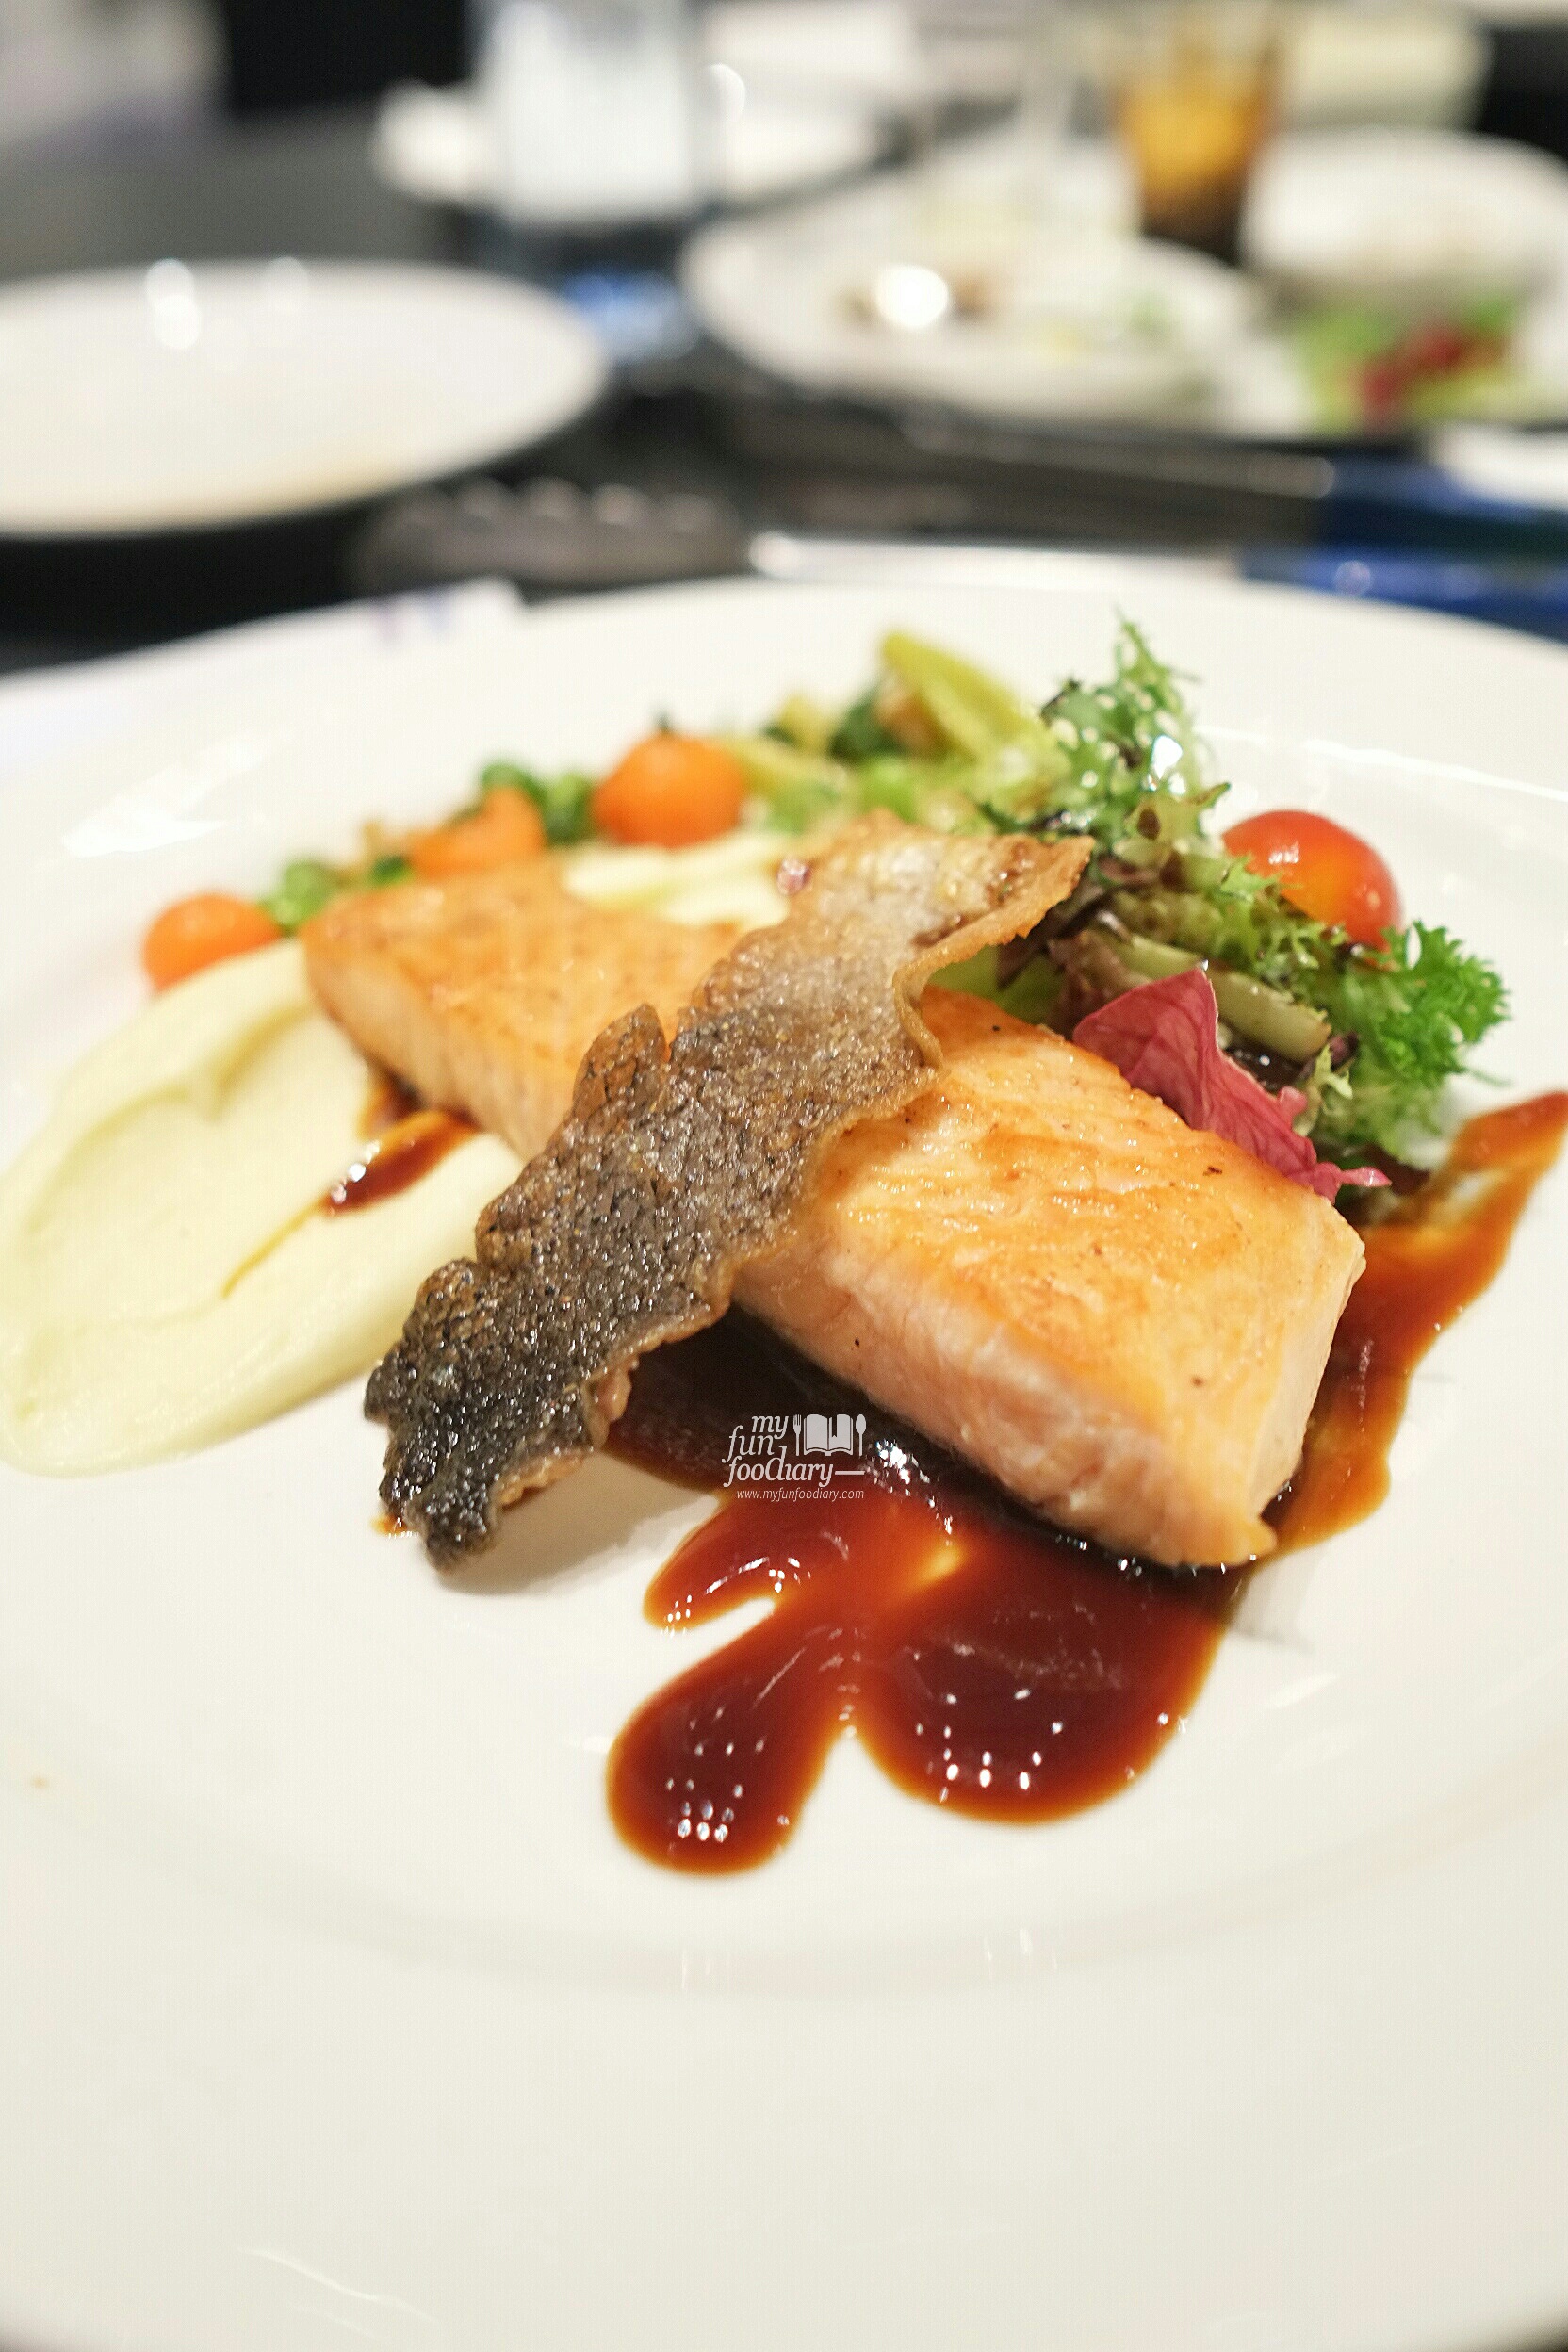 Pan Seared Crispy Skin Salmon at our Cooking Class with Artotel Thamrin by Myfunfoodiary 01